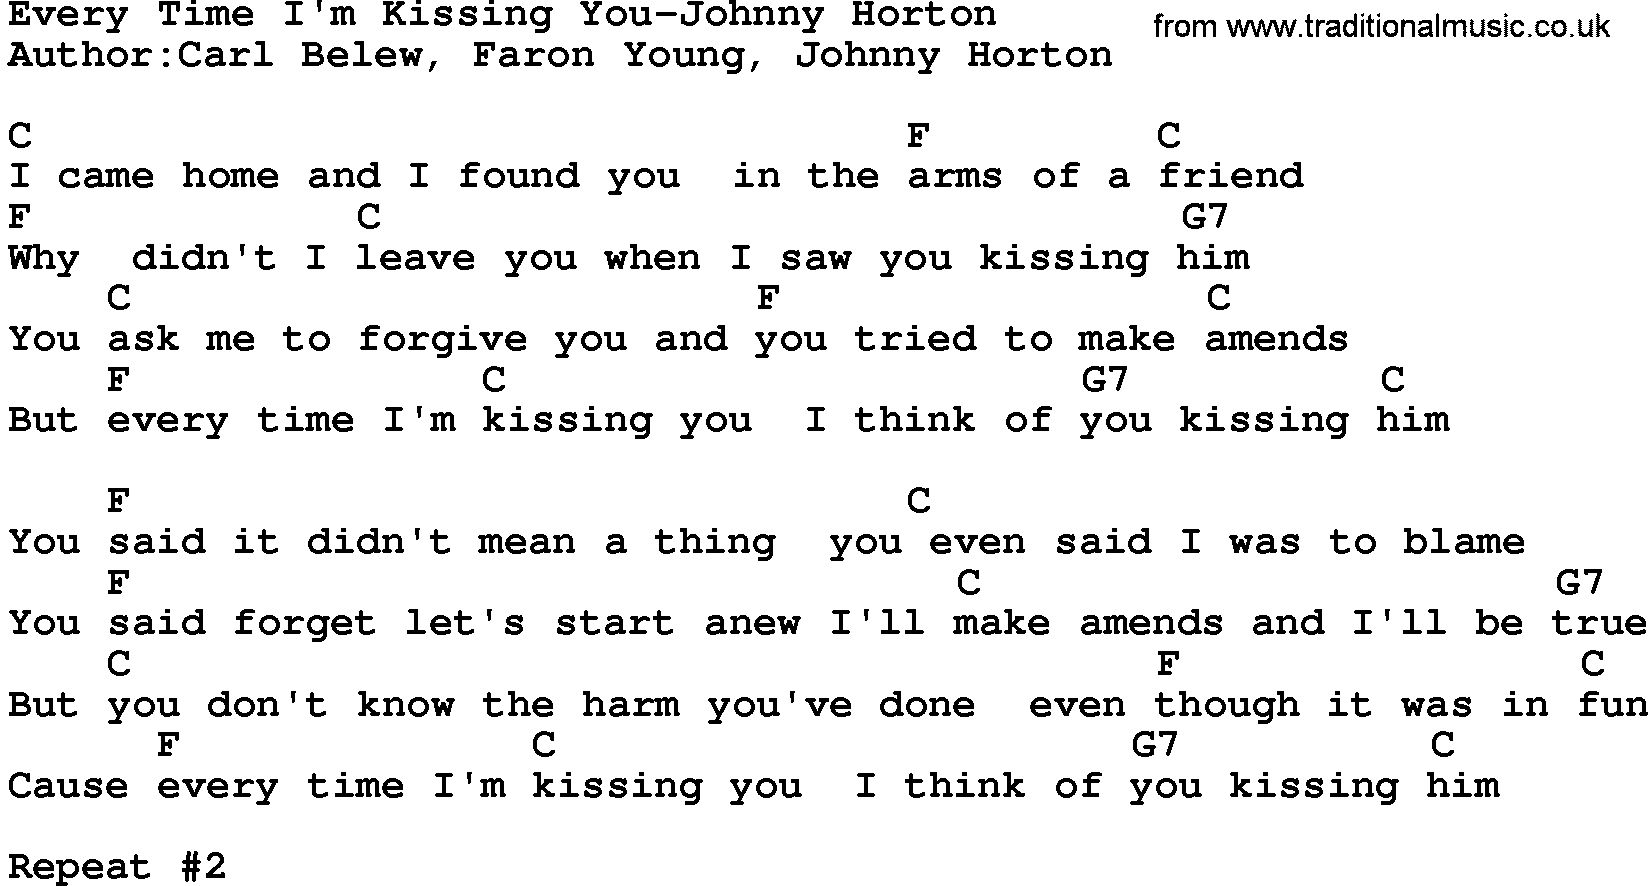 Country music song: Every Time I'm Kissing You-Johnny Horton lyrics and chords